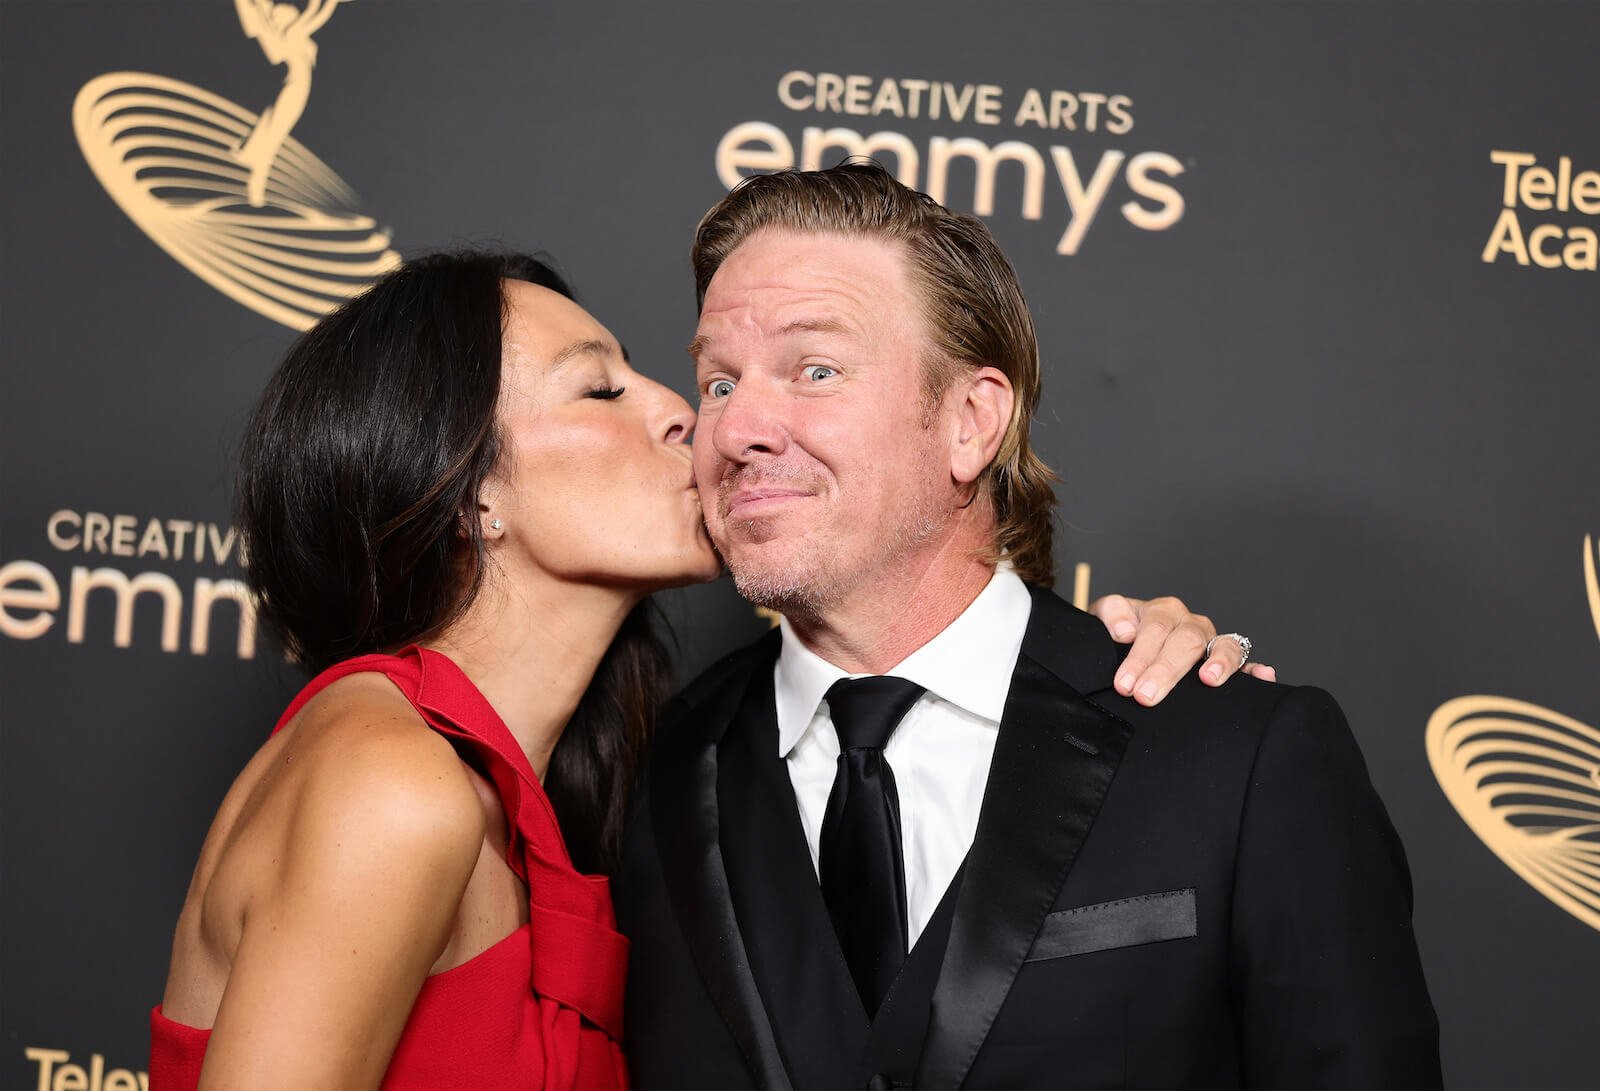 'Fixer Upper' star Joanna Gaines kissing Chip Gaines' cheek at the Emmys